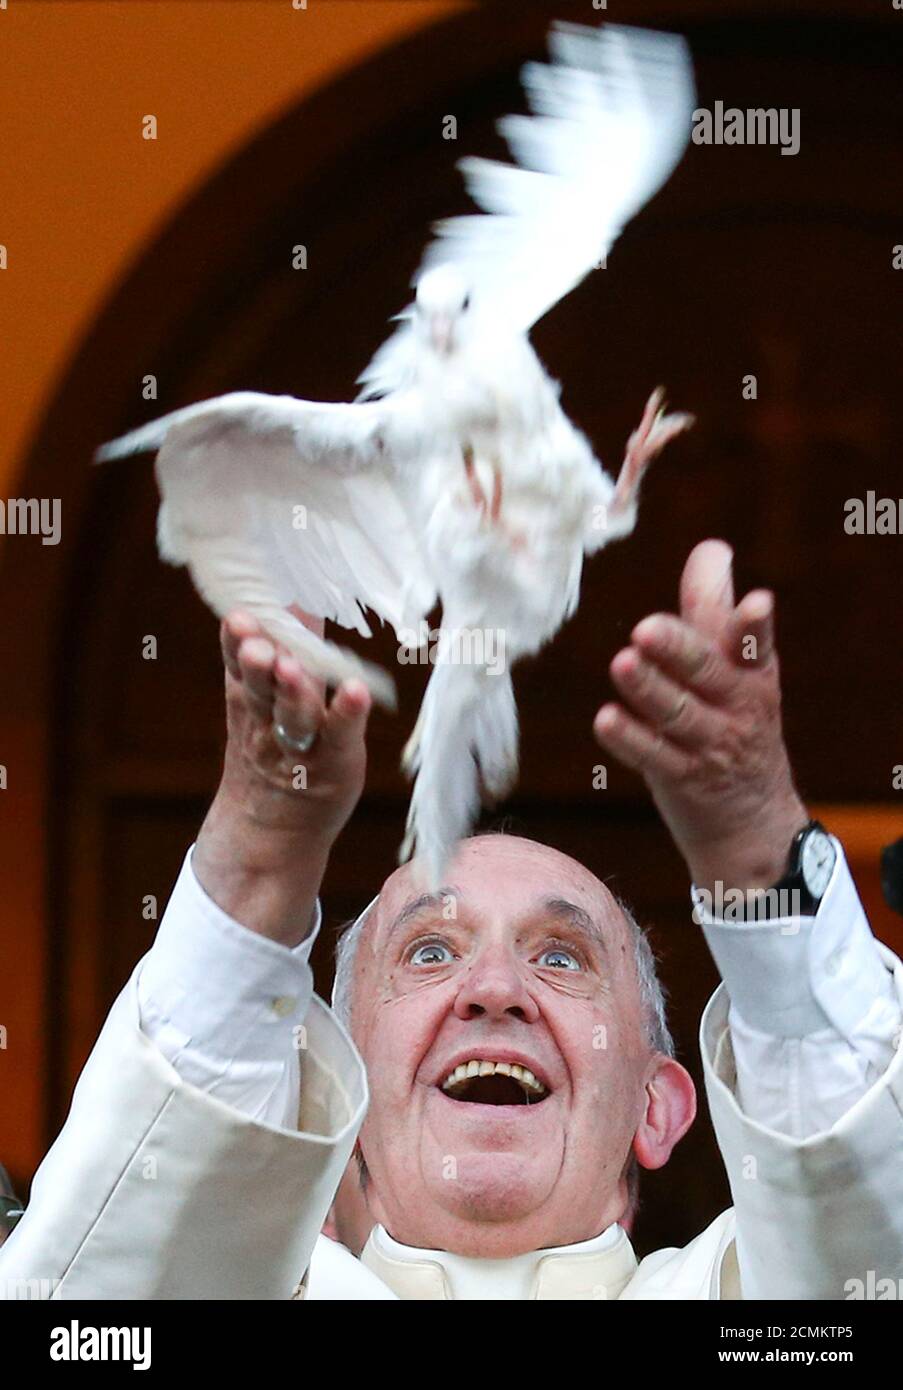 Pope Francis releases a dove at the end of a visit to the Chaldean Catholic Church of St. Simon Bar Sabbae in Tbilisi, Georgia, September 30, 2016. REUTERS/Alessandro Bianchi     TPX IMAGES OF THE DAY Stock Photo